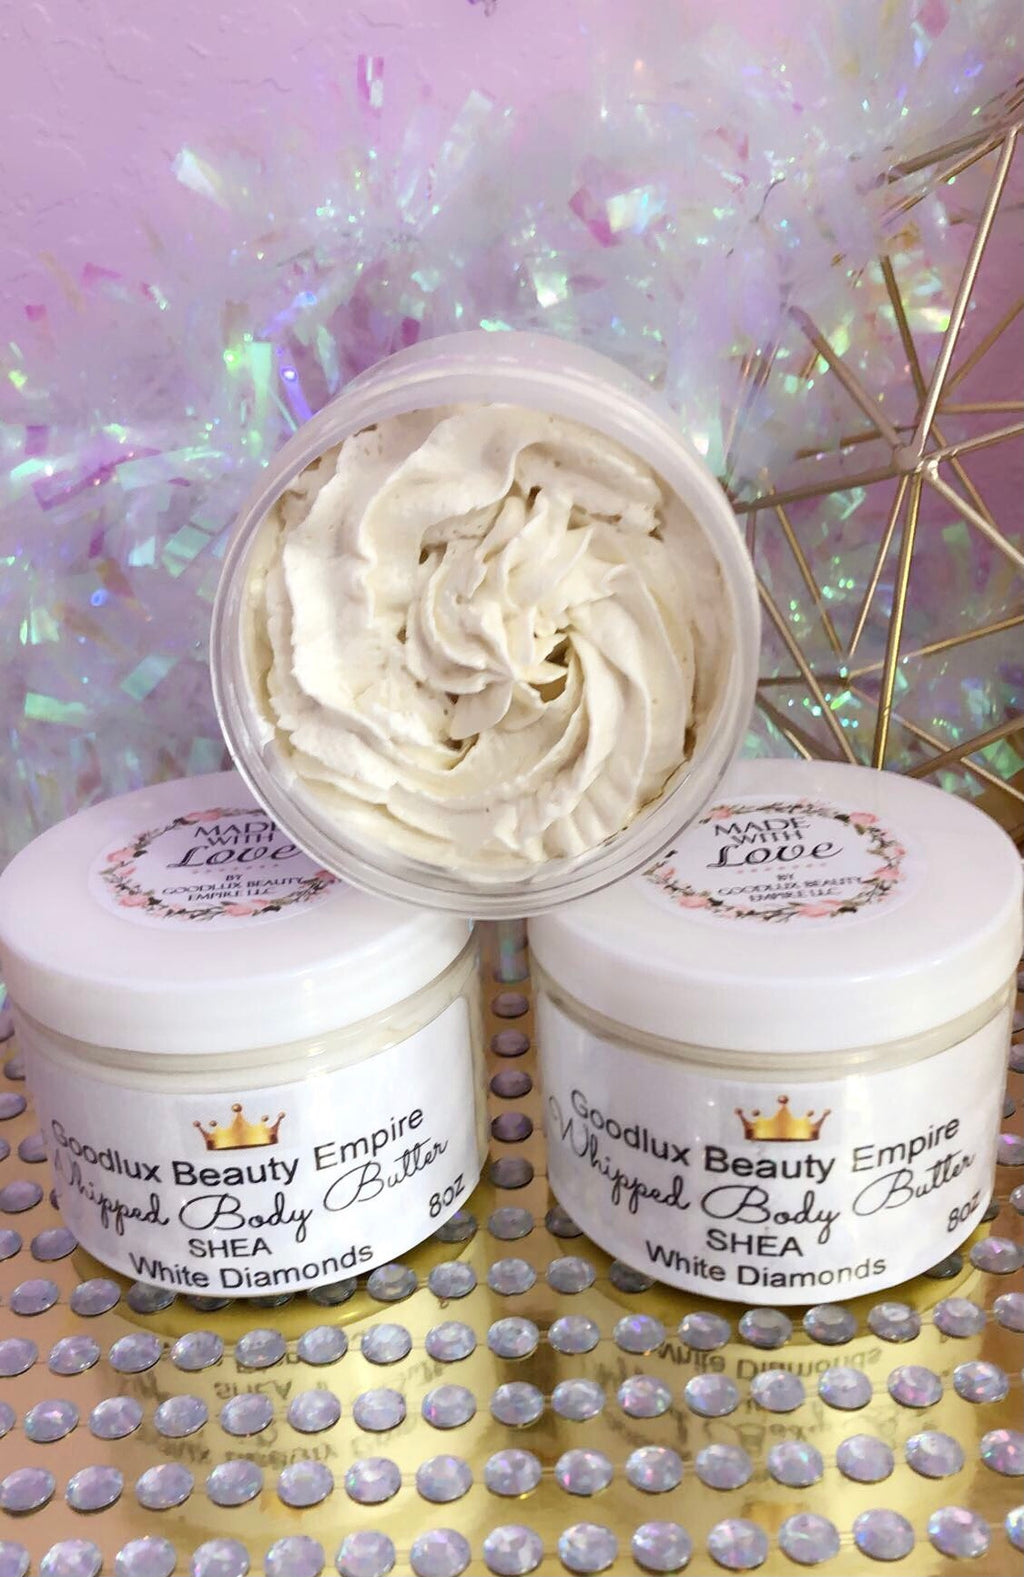 Our impression of White Diamonds Whipped Body Butter